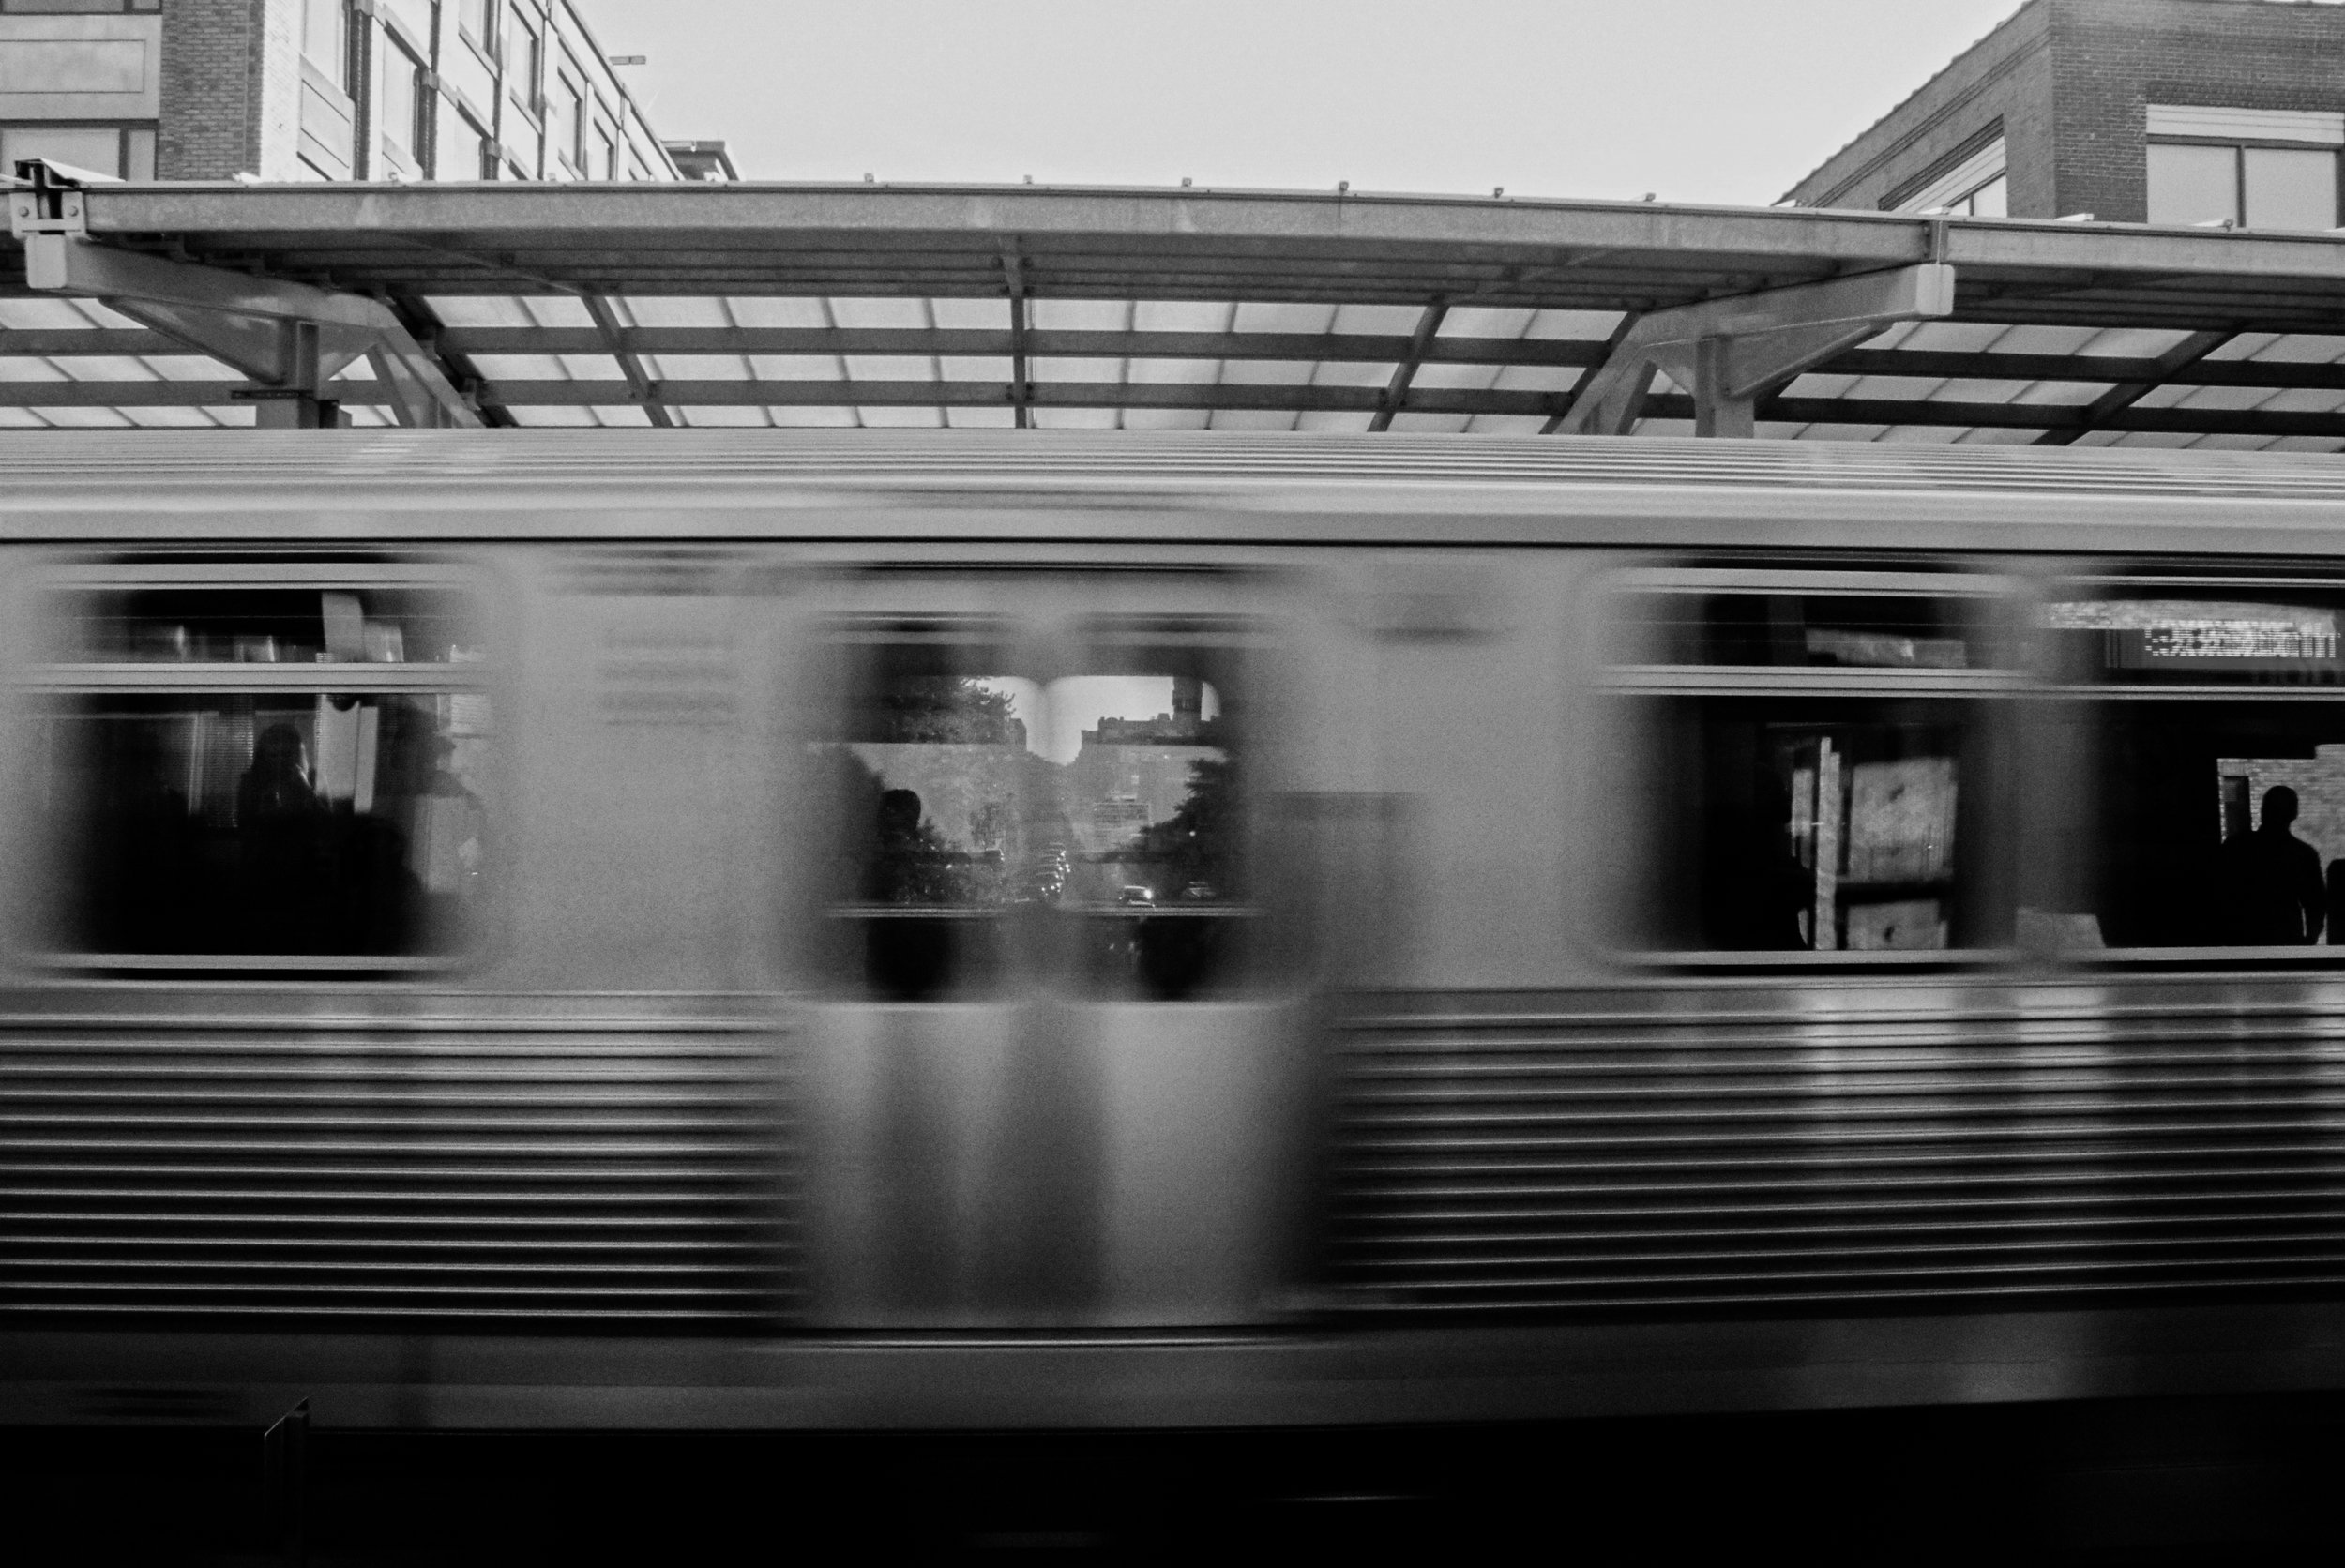    Human Movement    The collection of images displayed here are inspired by the themes of transit and human movement, as well as the isolation and silence one often experiences while being surrounded by hundreds of nameless passengers with unknown d